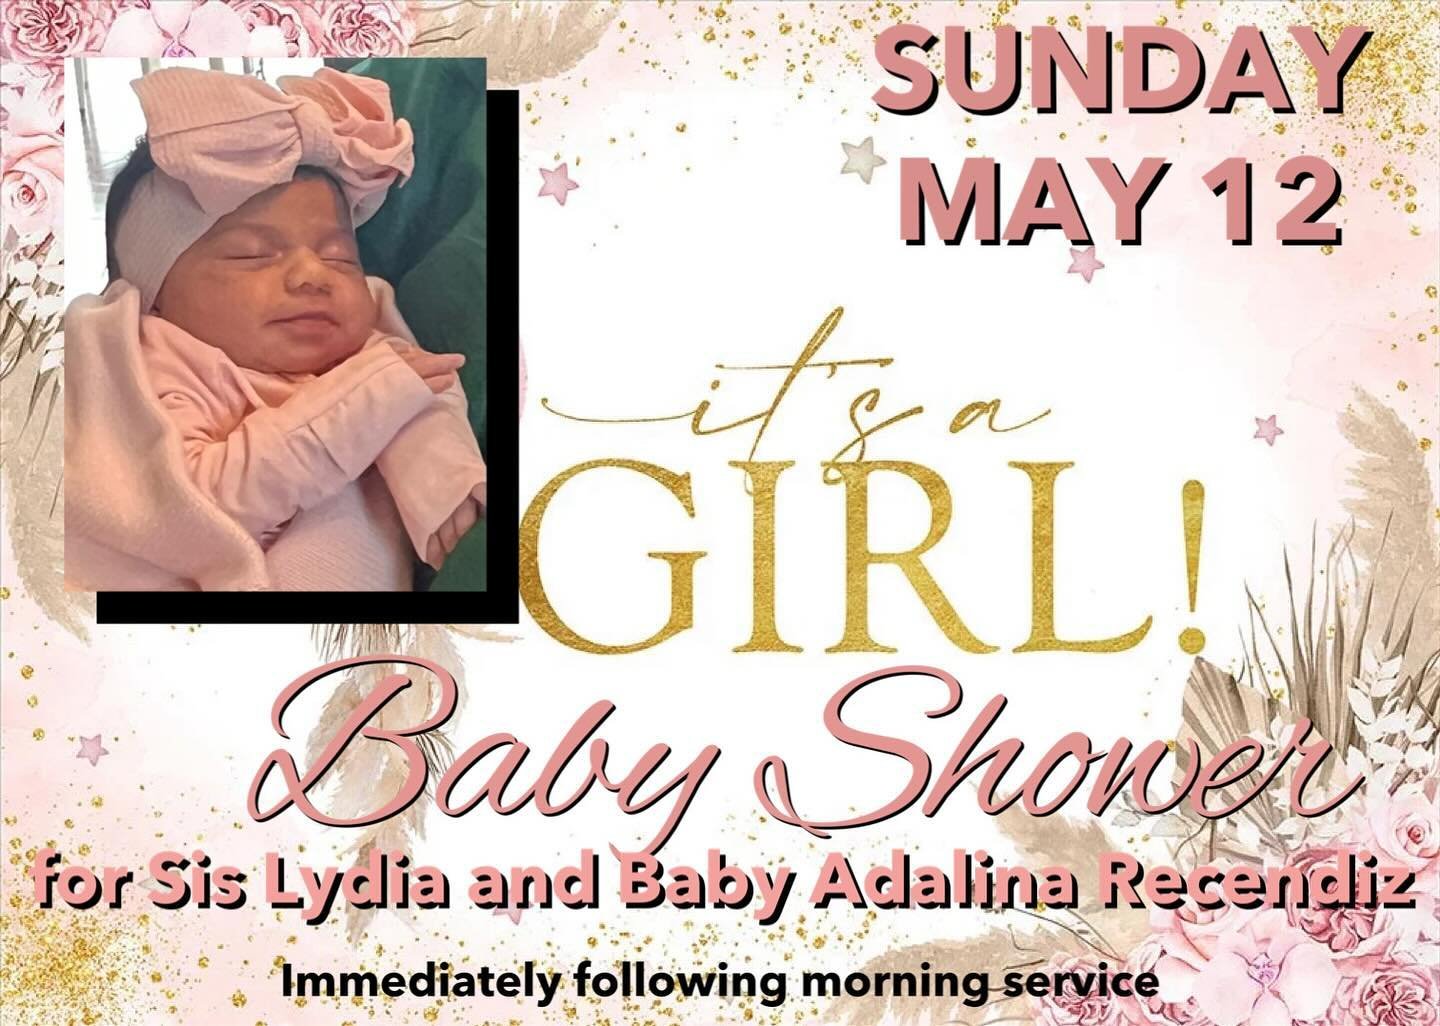 🌸💗BABY SHOWER for Sis Lydia Recendiz and her sweet baby girl, Adalina Ava. Sunday, May 12, in the foyer, immediately following morning service. 🌸